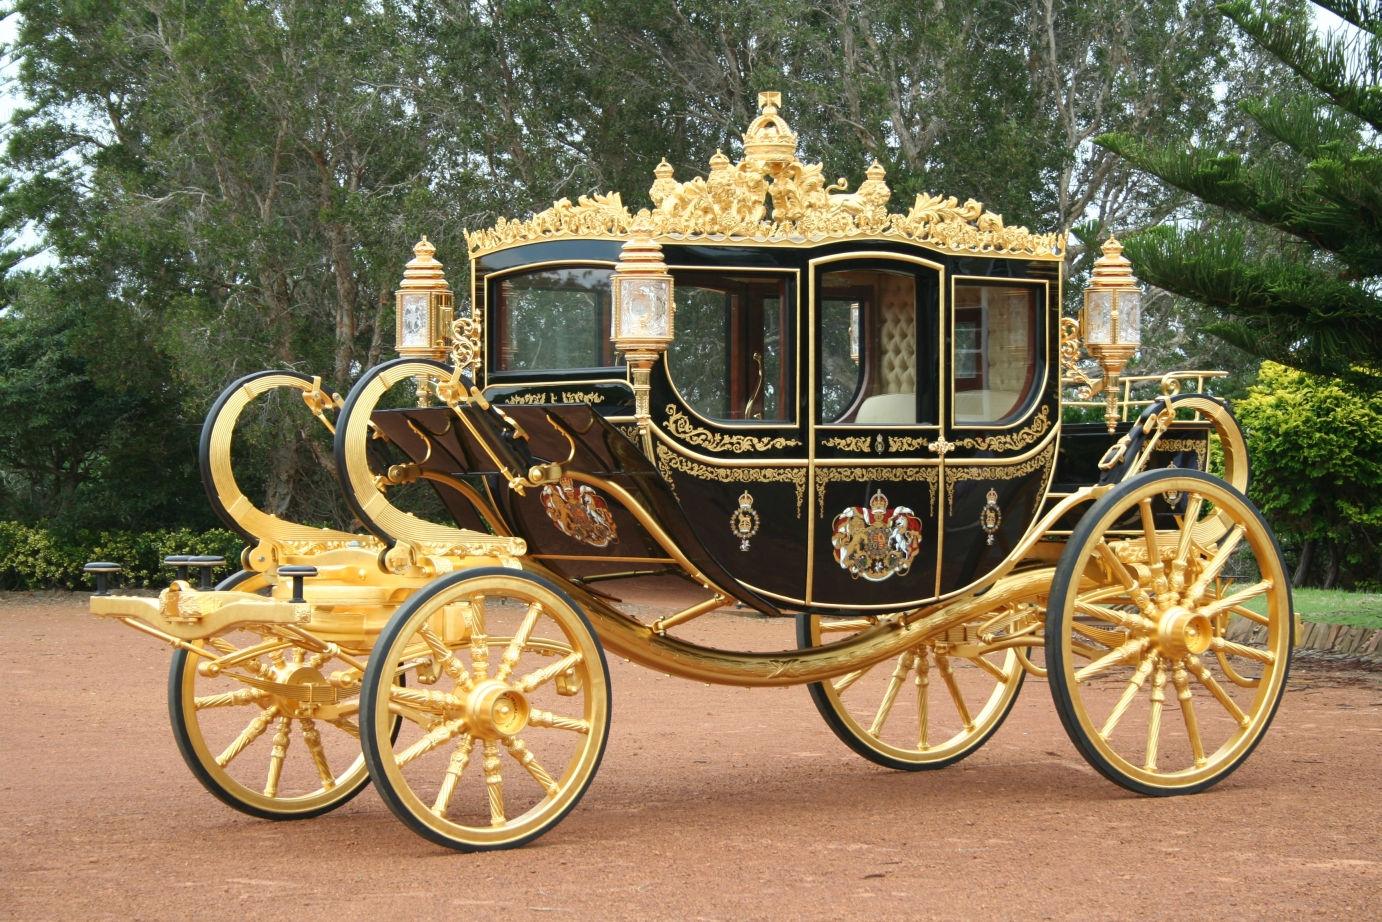 The Diamond Jubilee coach By Grahamedown [Public domain], from Wikimedia Commons